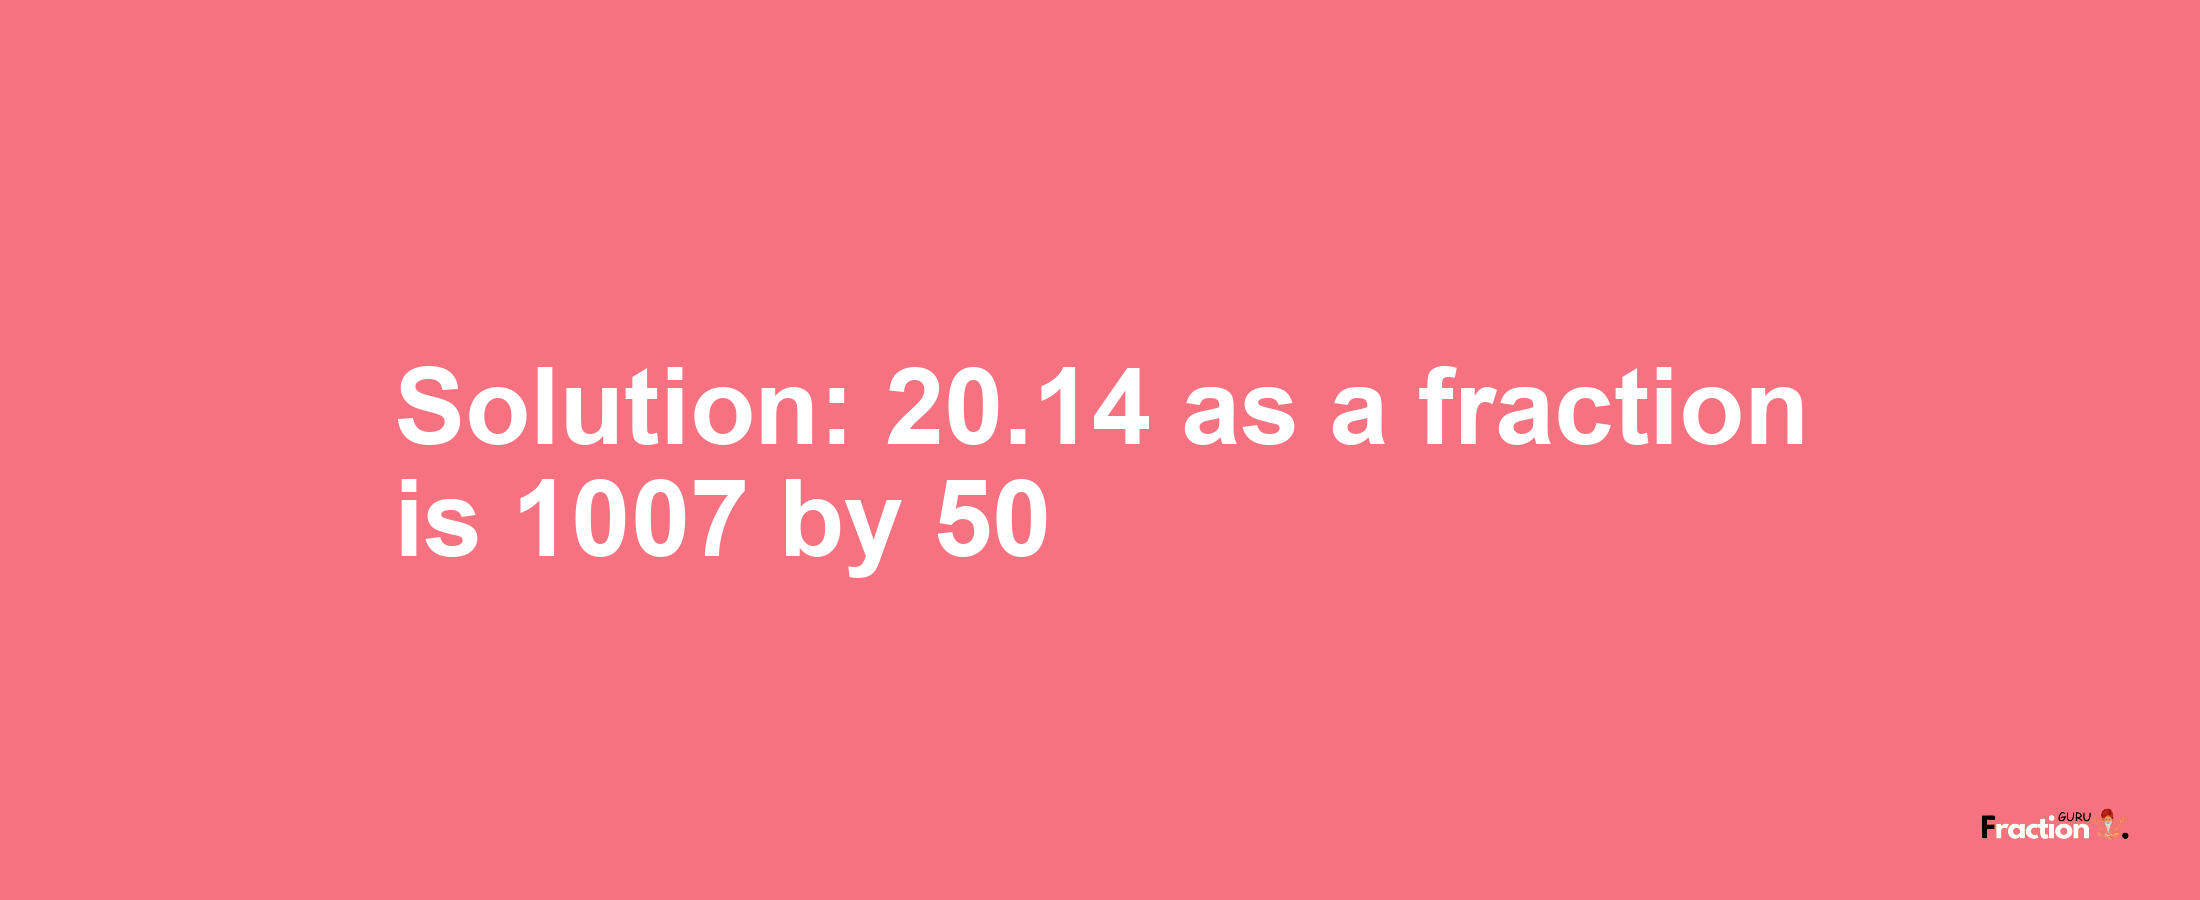 Solution:20.14 as a fraction is 1007/50